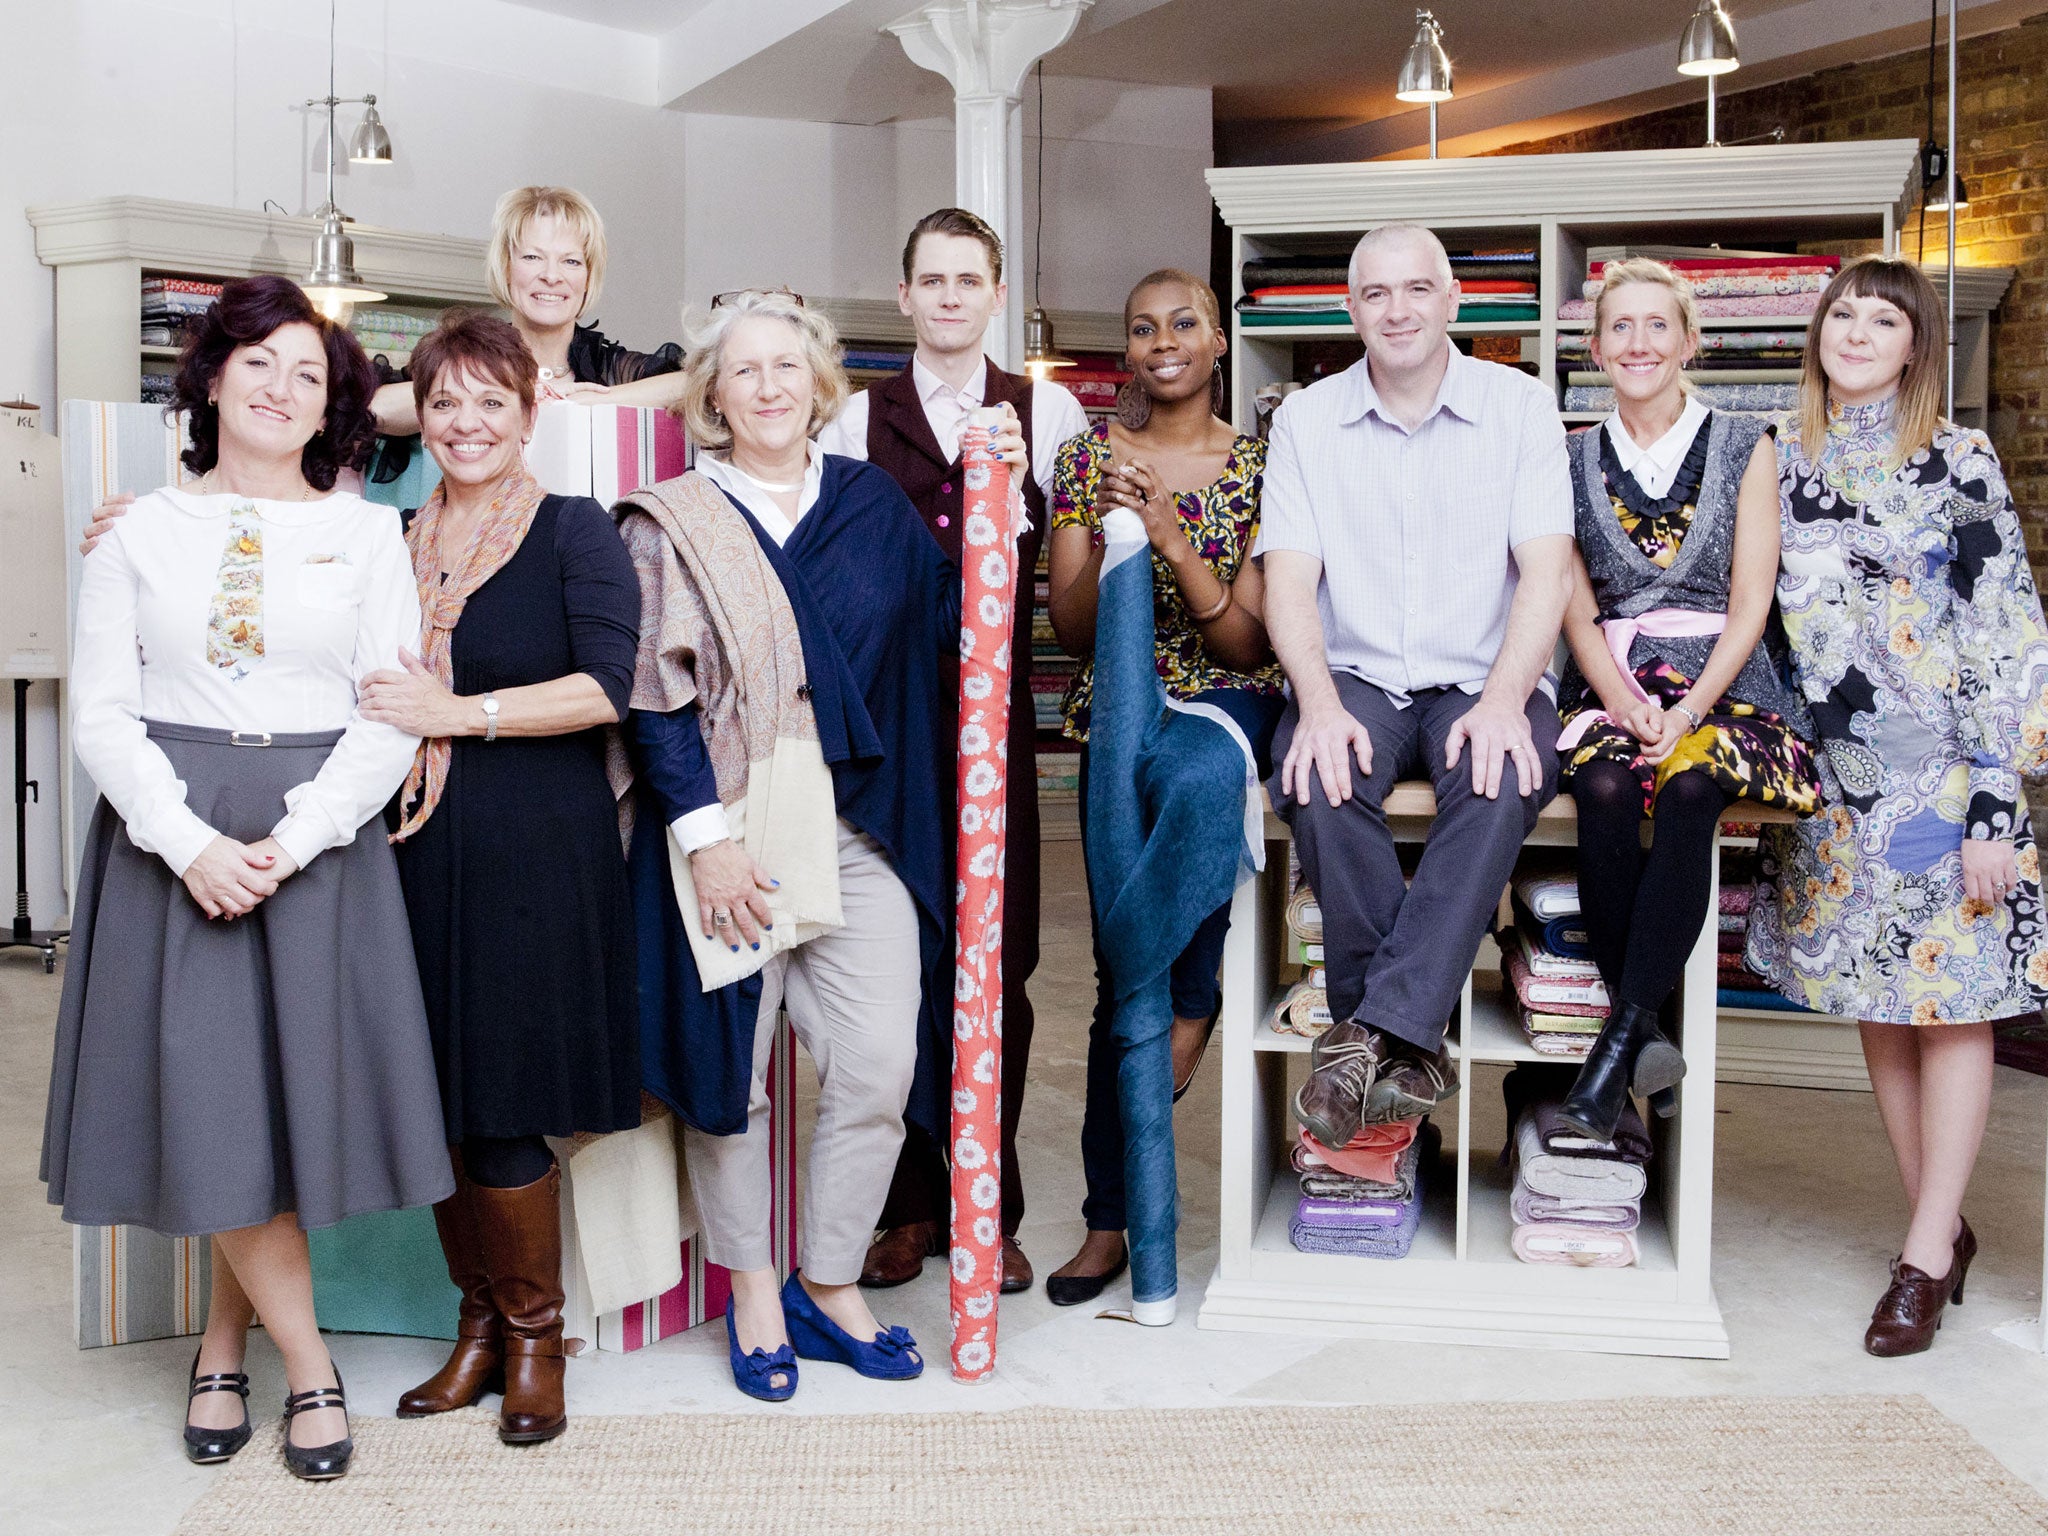 Julie, Lynda, Heather, Cerina, Simon, Chinelo, David, Tamara, Jenni are competing in the new series of The Great British Sewing Bee